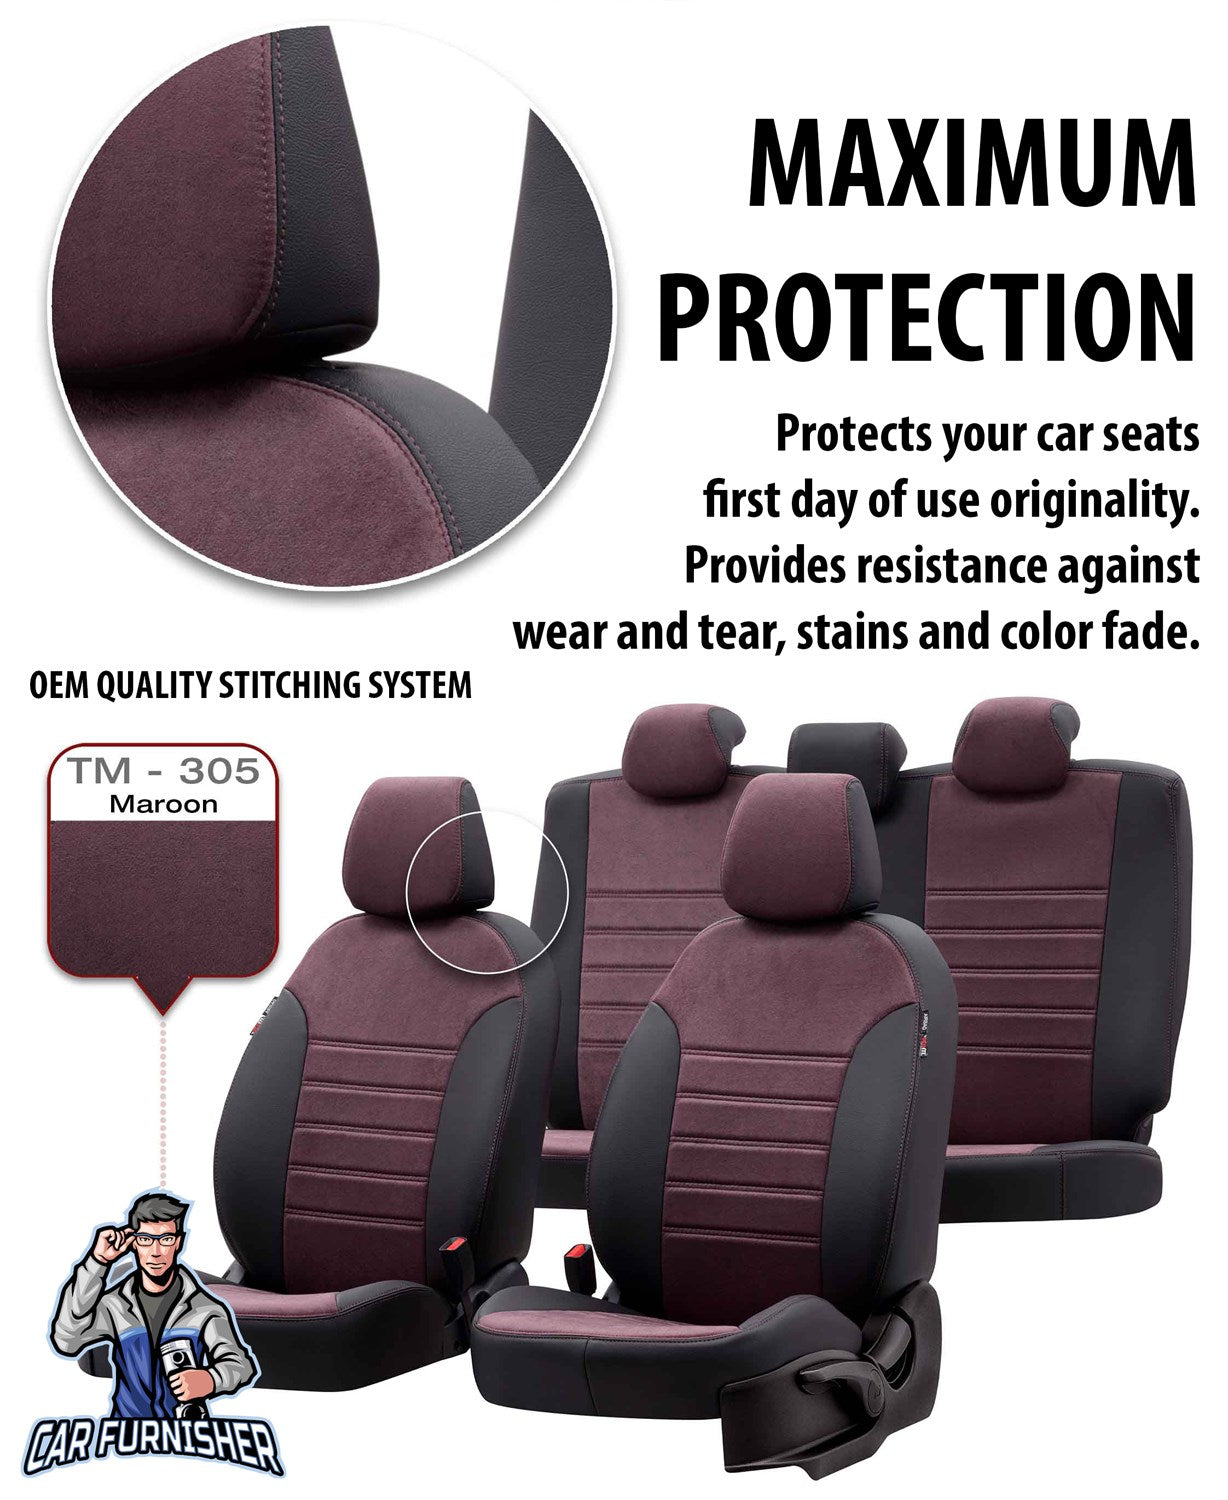 Volvo S40 Seat Cover Milano Suede Design Burgundy Leather & Suede Fabric